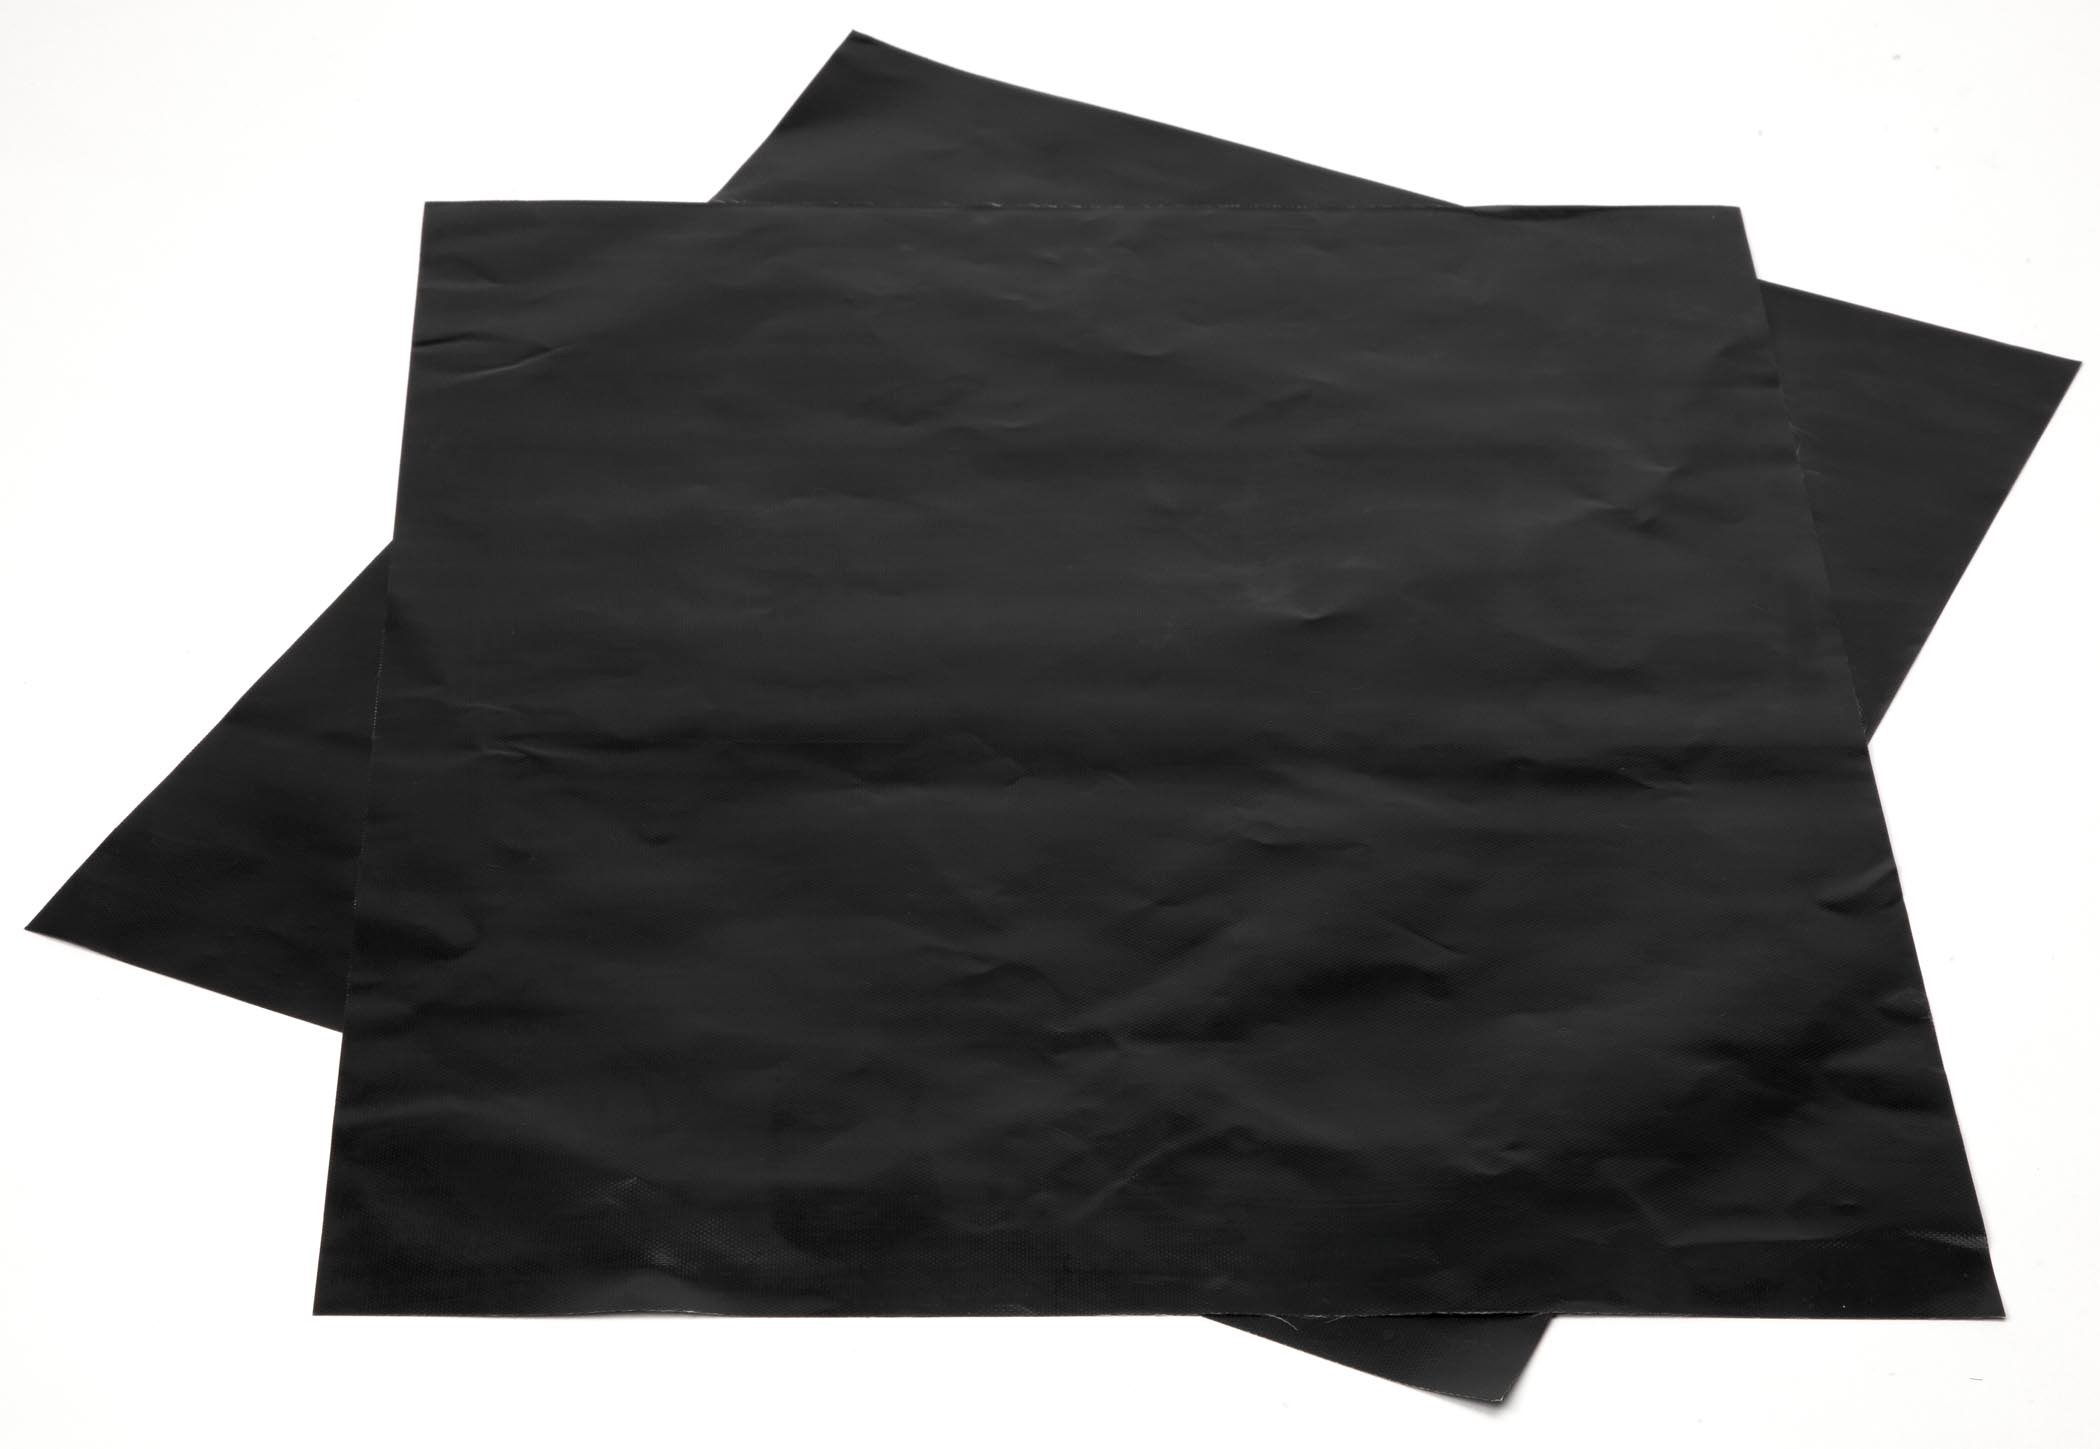 Non-Stick Reusable Grilling Sheets (2-Pack)